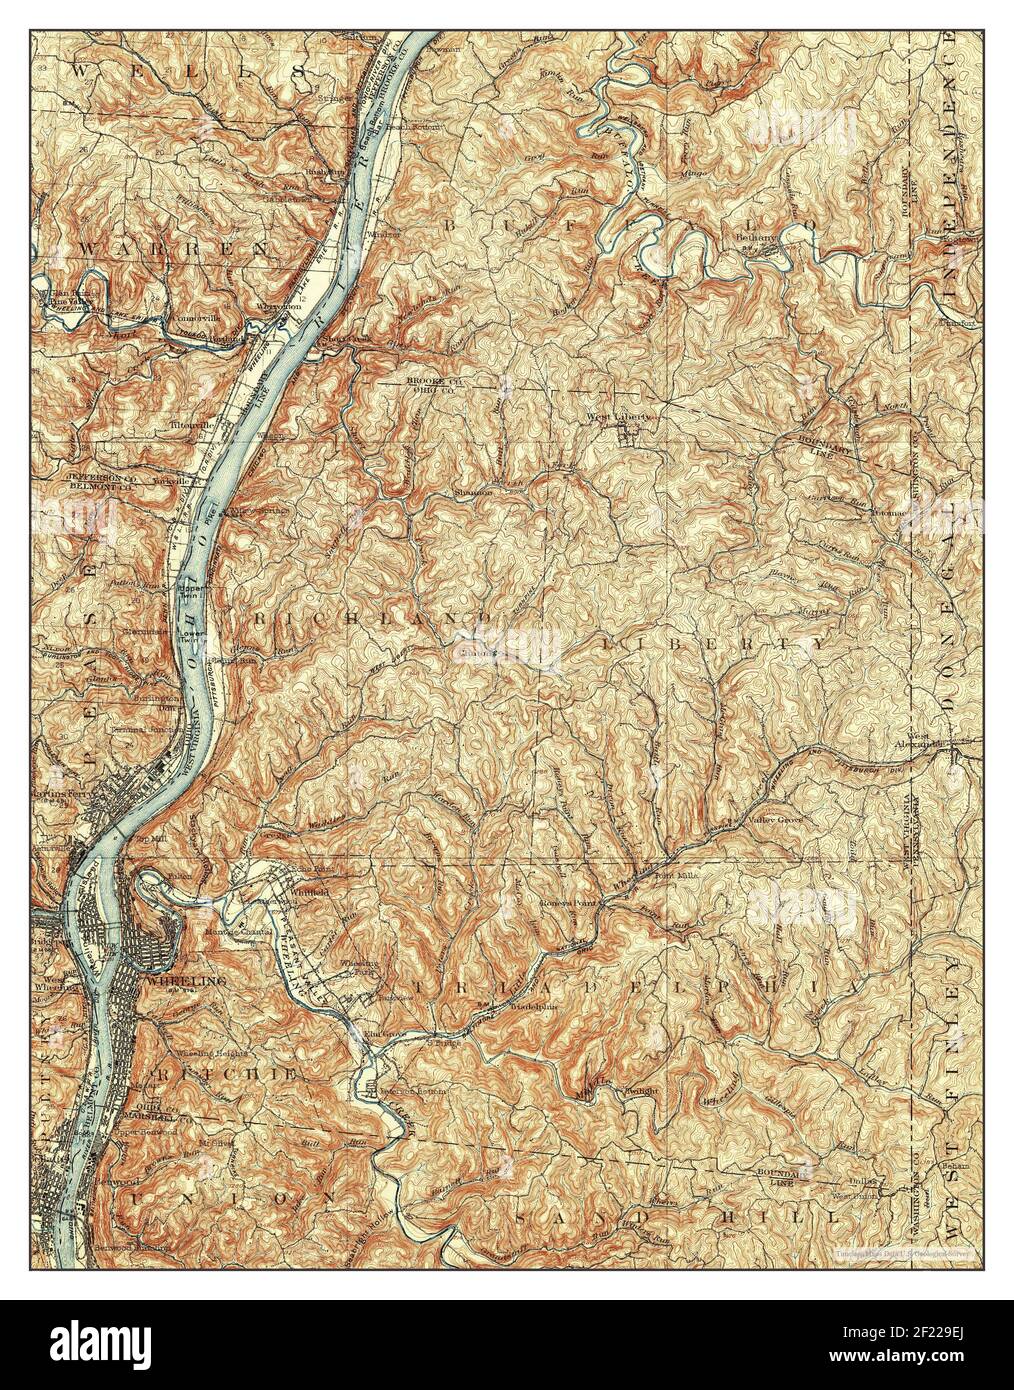 Wheeling, West Virginia, map 1902, 1:62500, United States of America by Timeless Maps, data U.S. Geological Survey Stock Photo